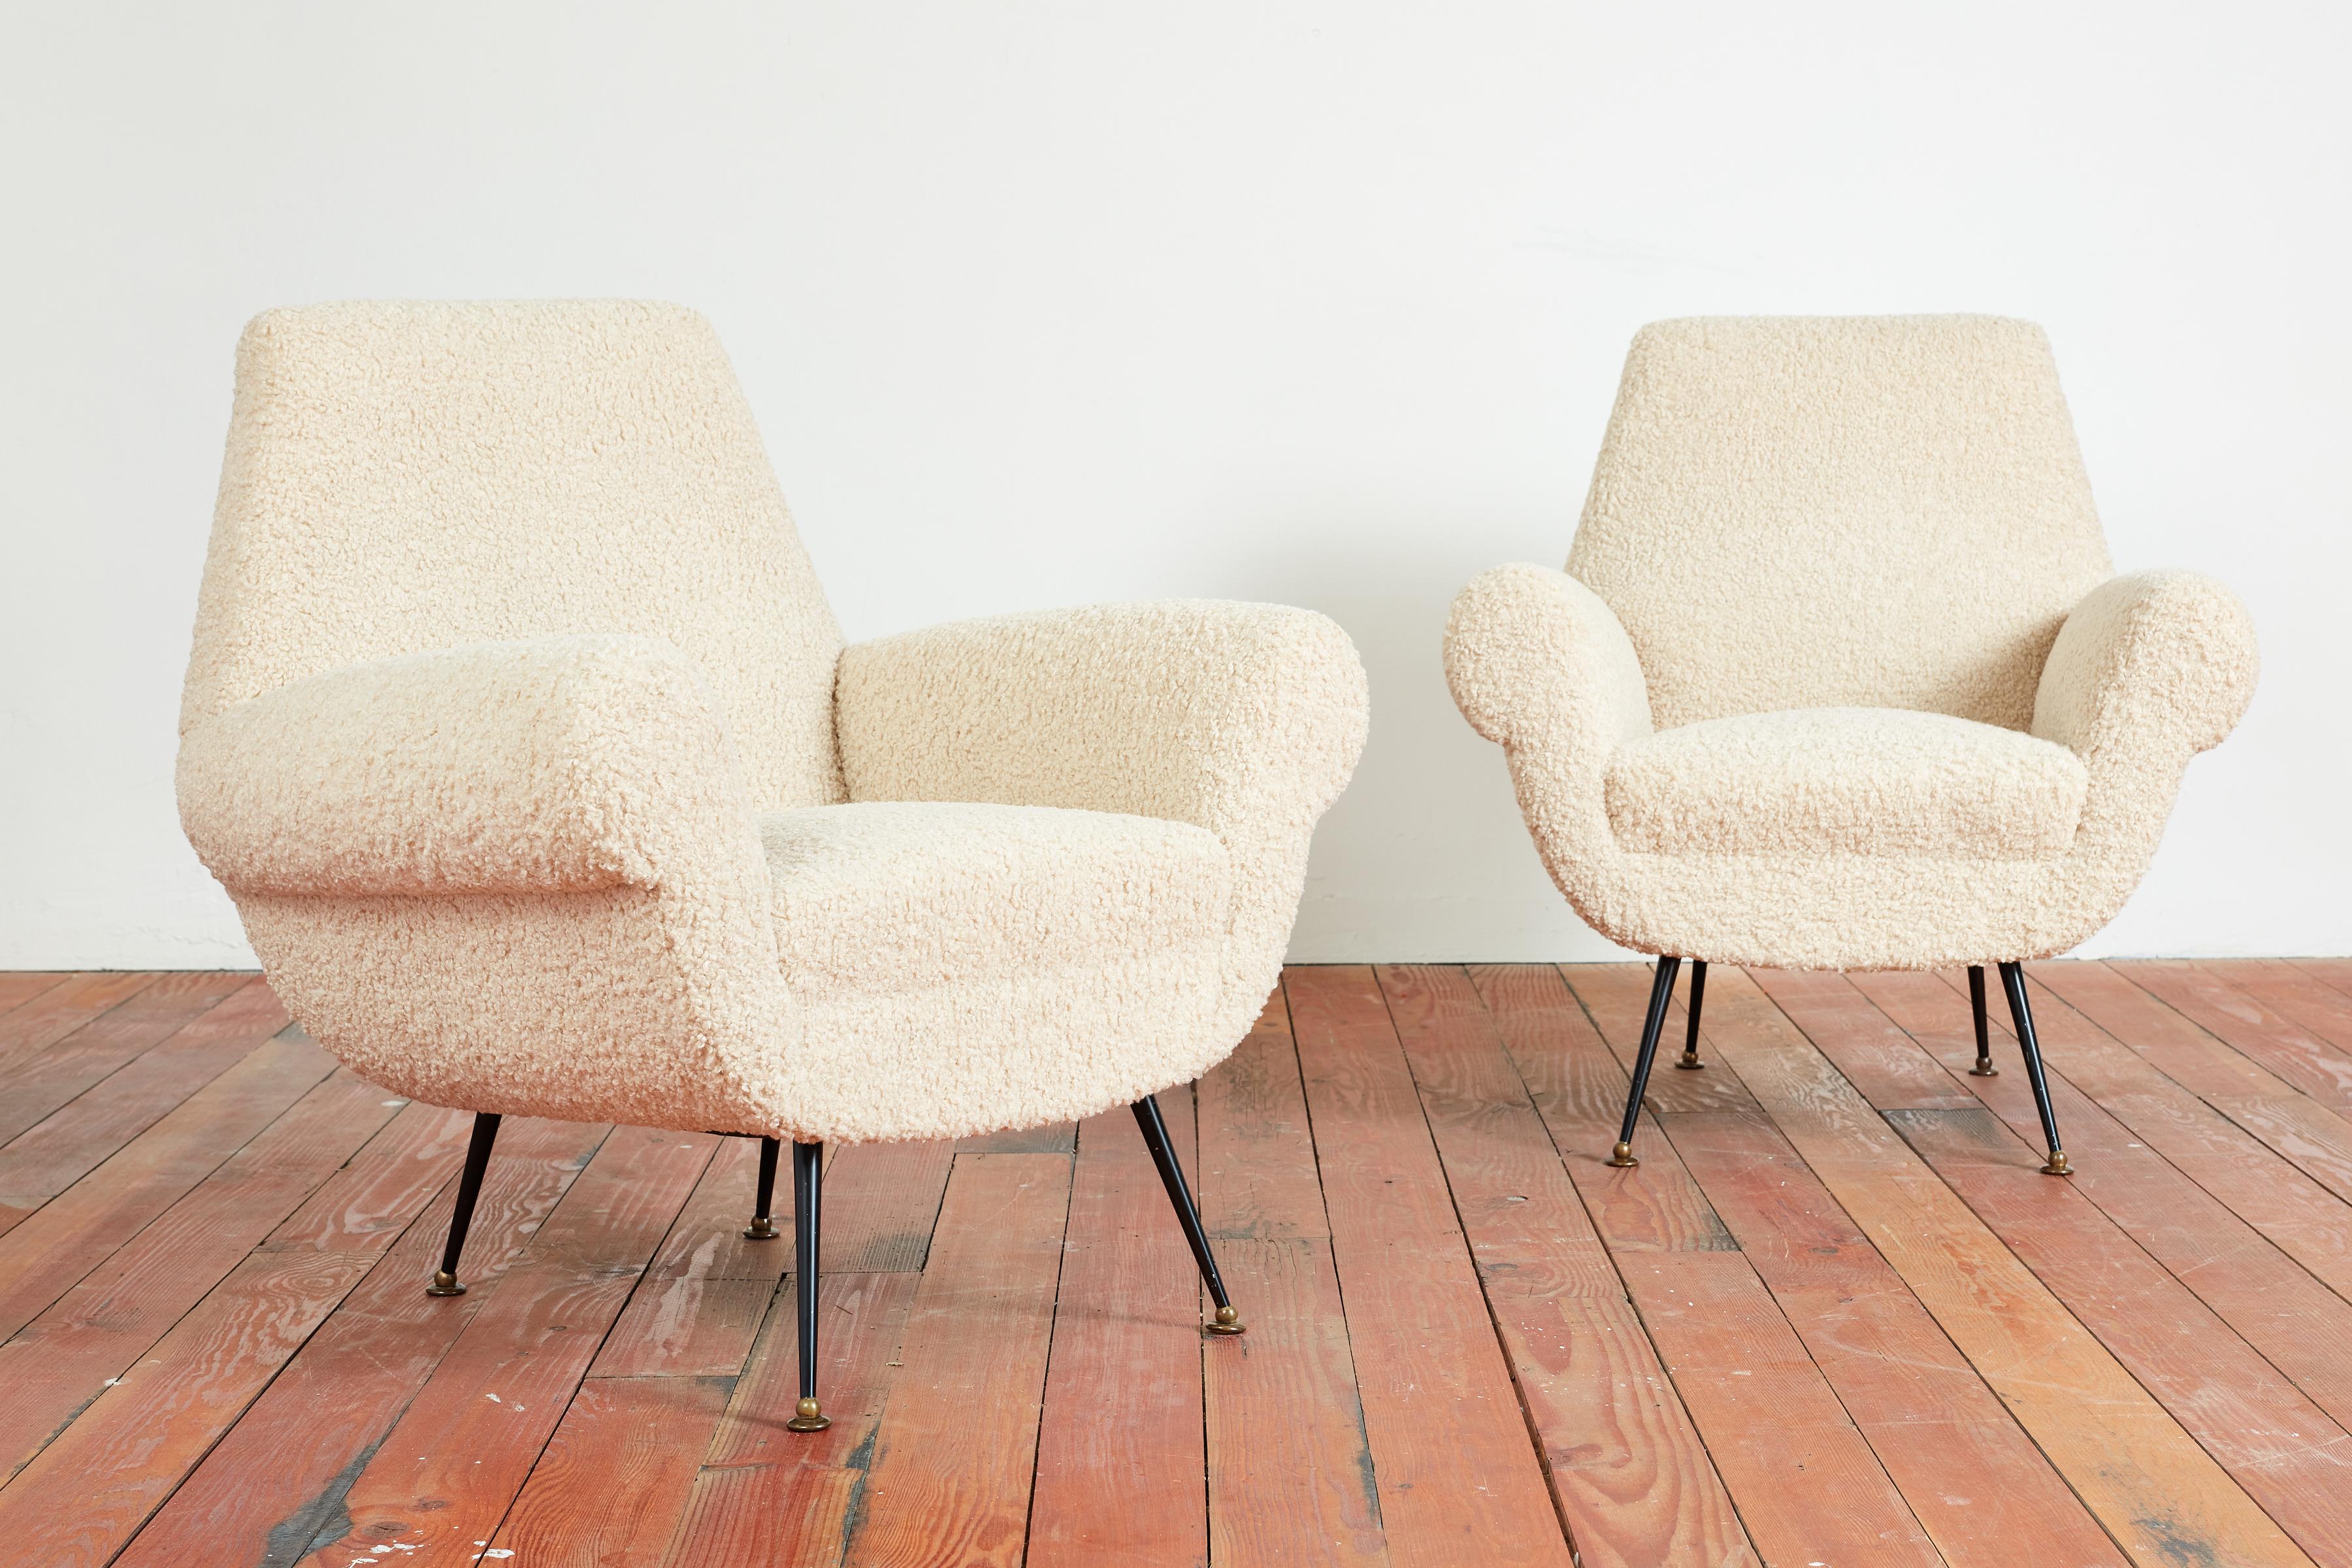 Pair of Gigi Radice armchairs for Minotti - Italy, 1950s
Reupholstered in creamy colored wool boucle with original iron legs and brass feet.
Great curved shape 
Matching sofa available.